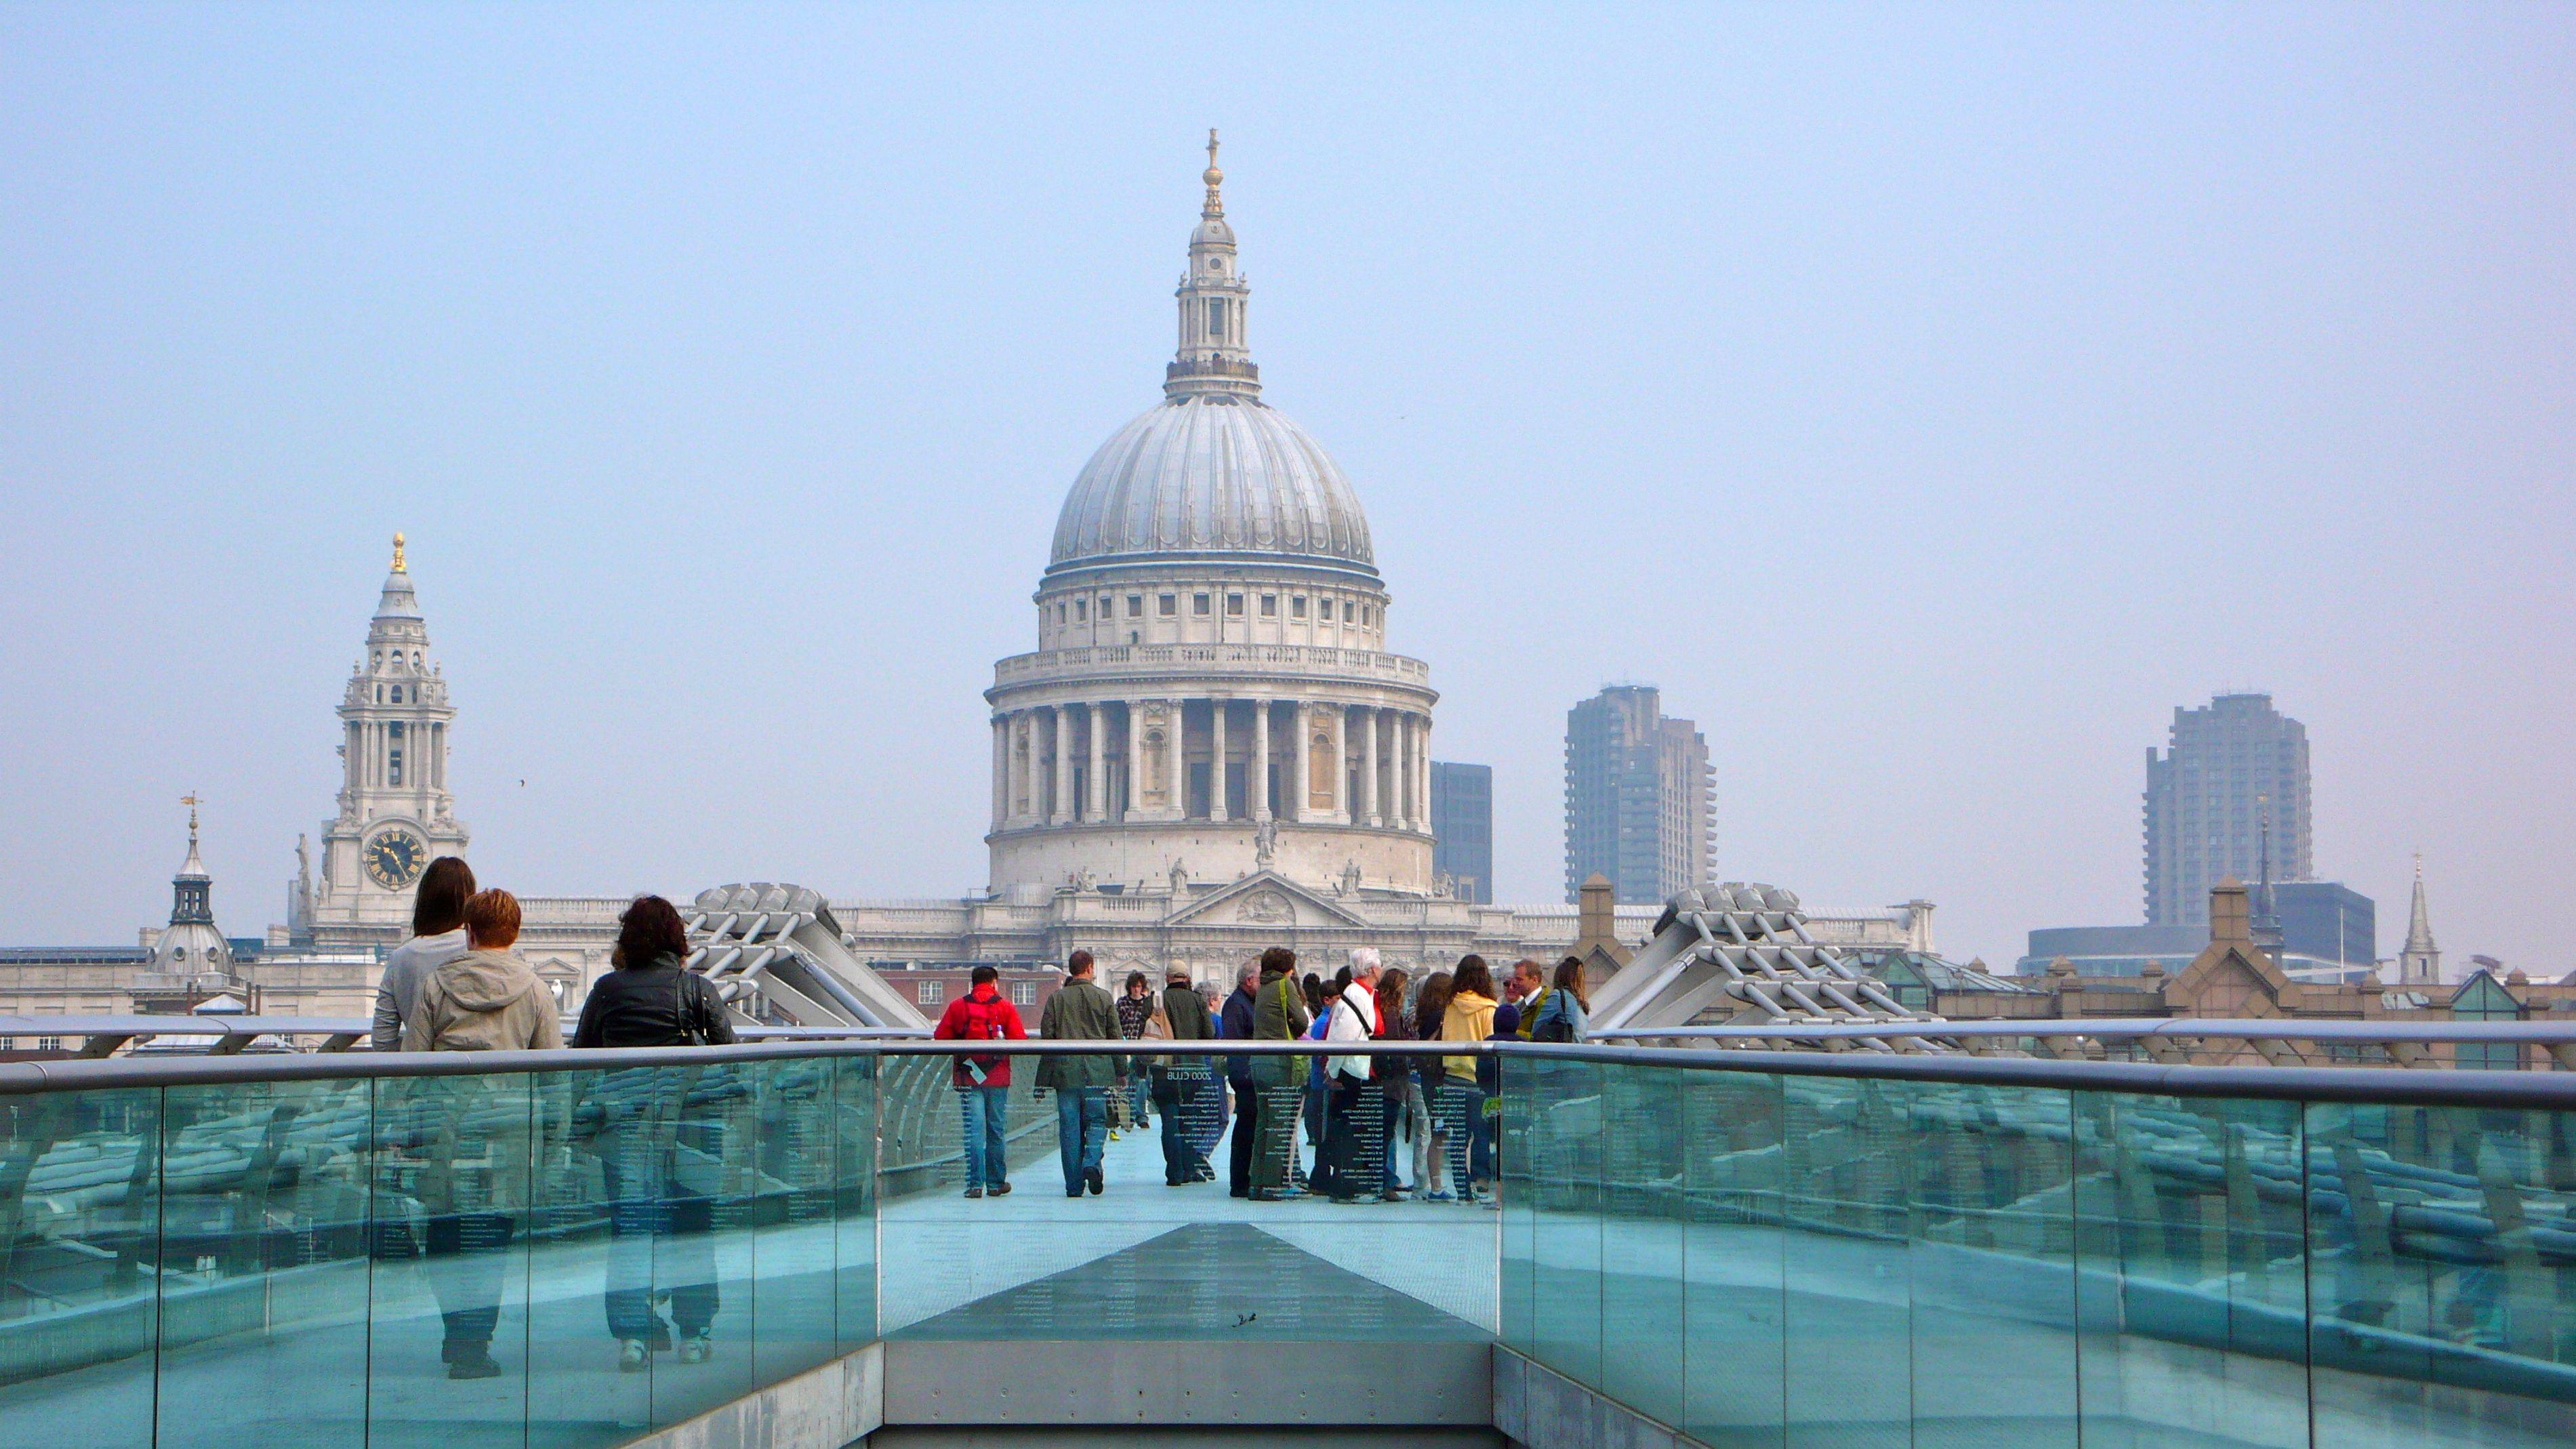 St. Pauls cathedral London. From the Millenium bridge